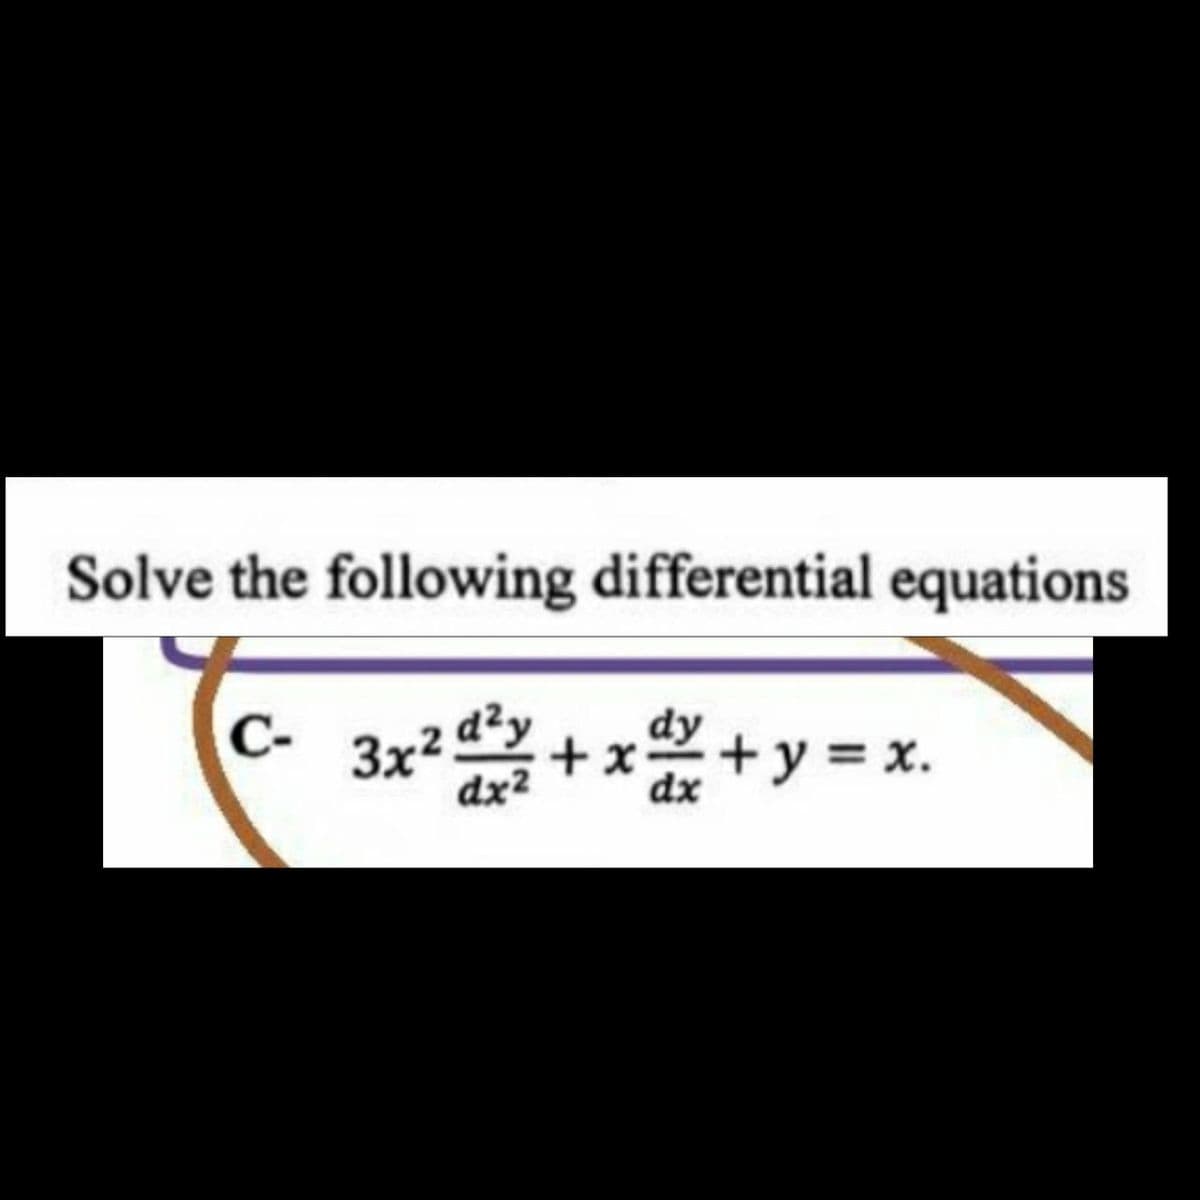 Solve the following differential equations
3x2 d?y
dx2
C-
+x+y = x.
